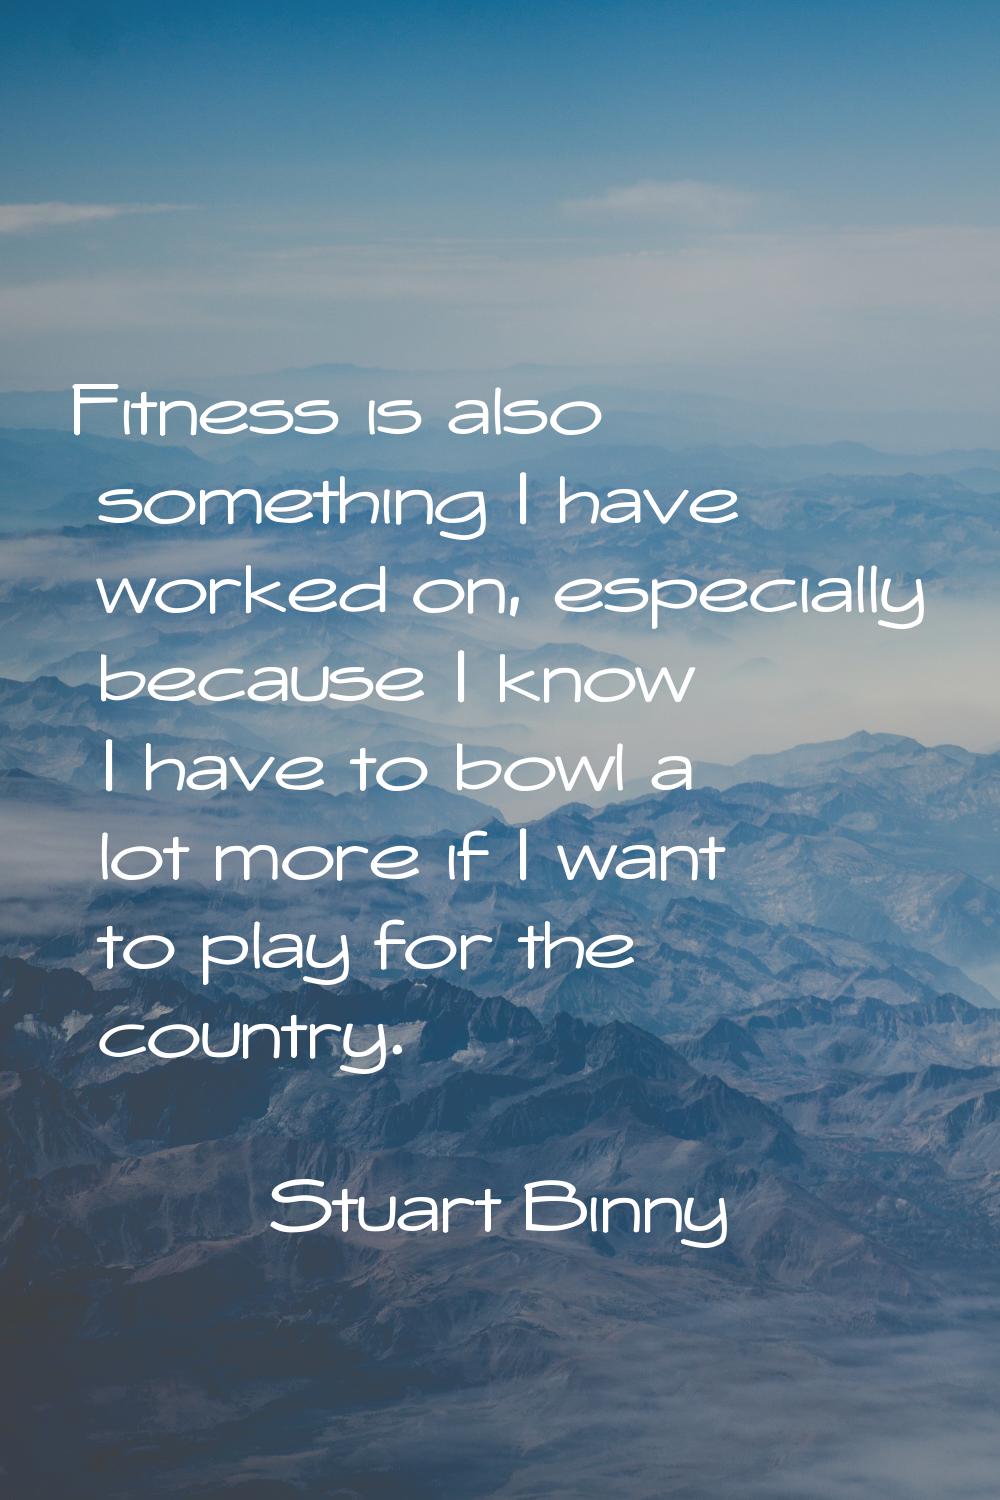 Fitness is also something I have worked on, especially because I know I have to bowl a lot more if 